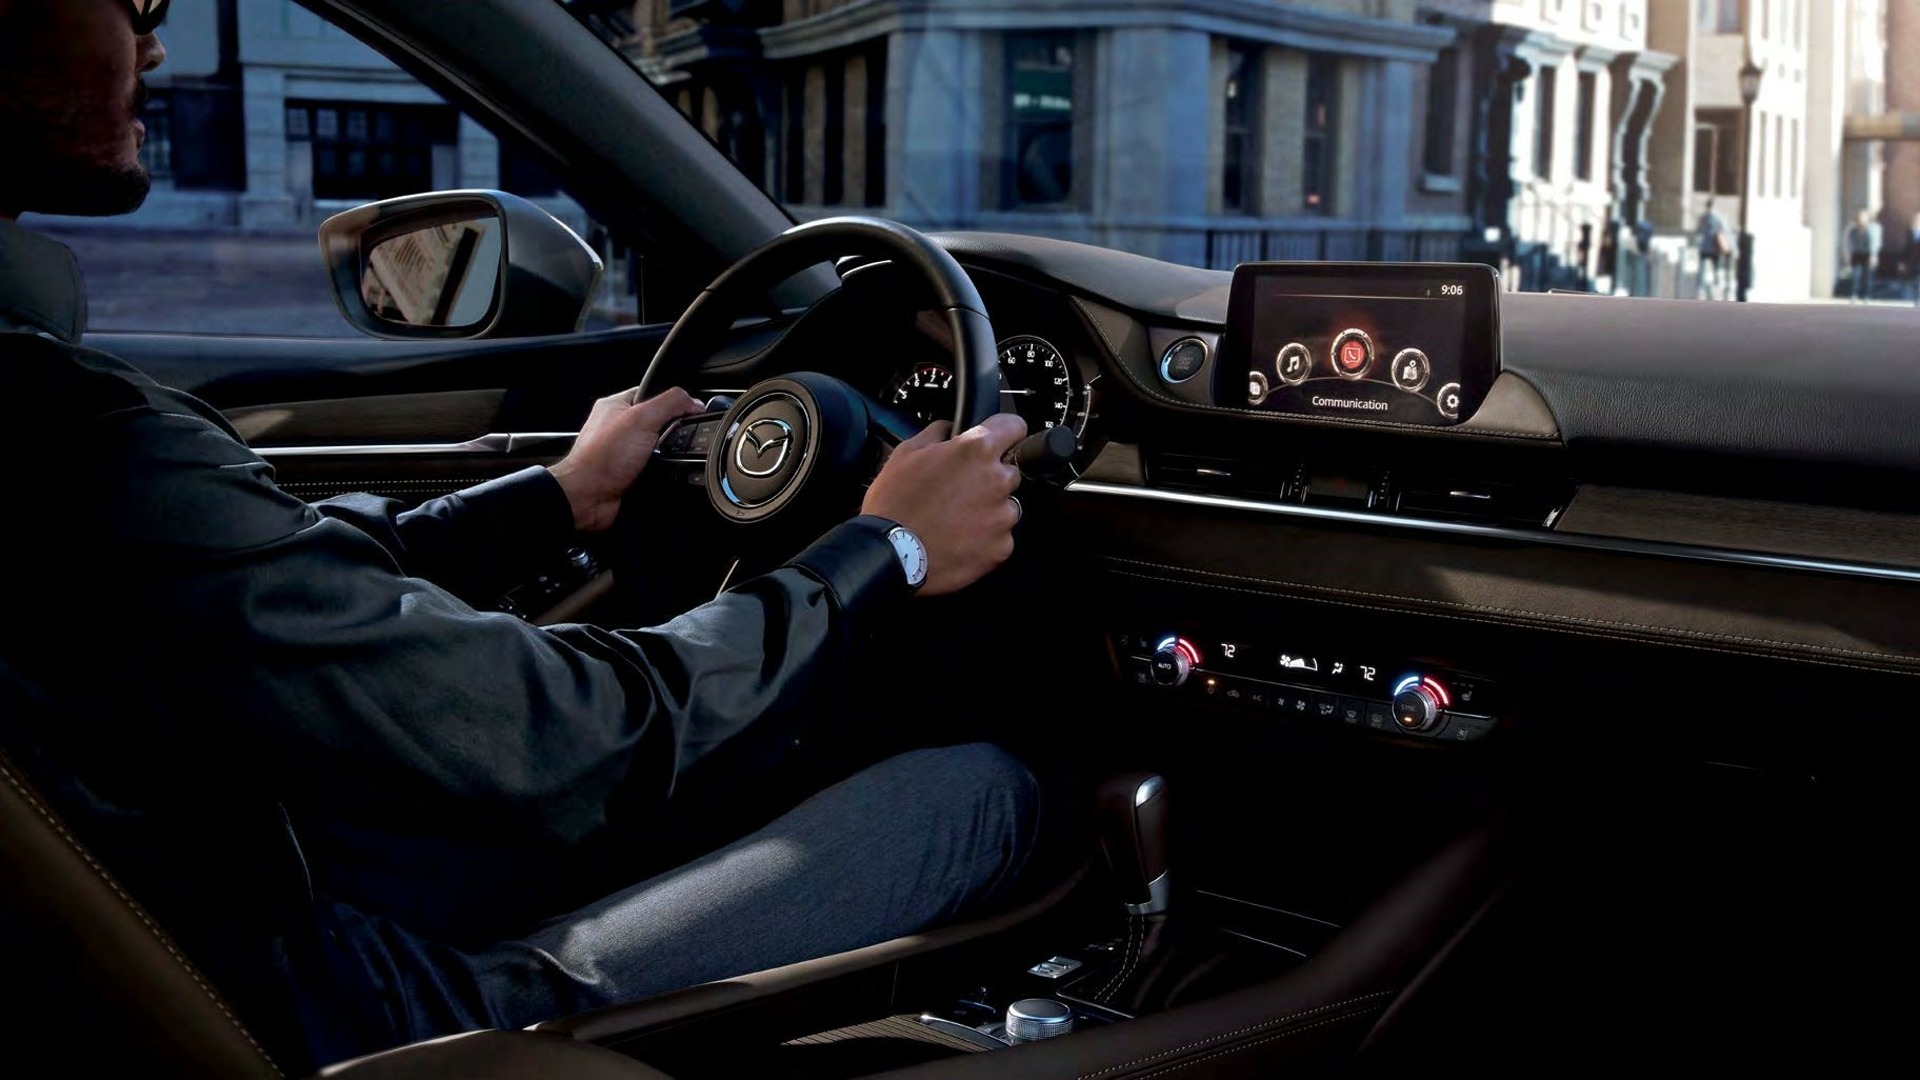 The Steering And Center Console Of The Mazda 6 (Credits Mazda)